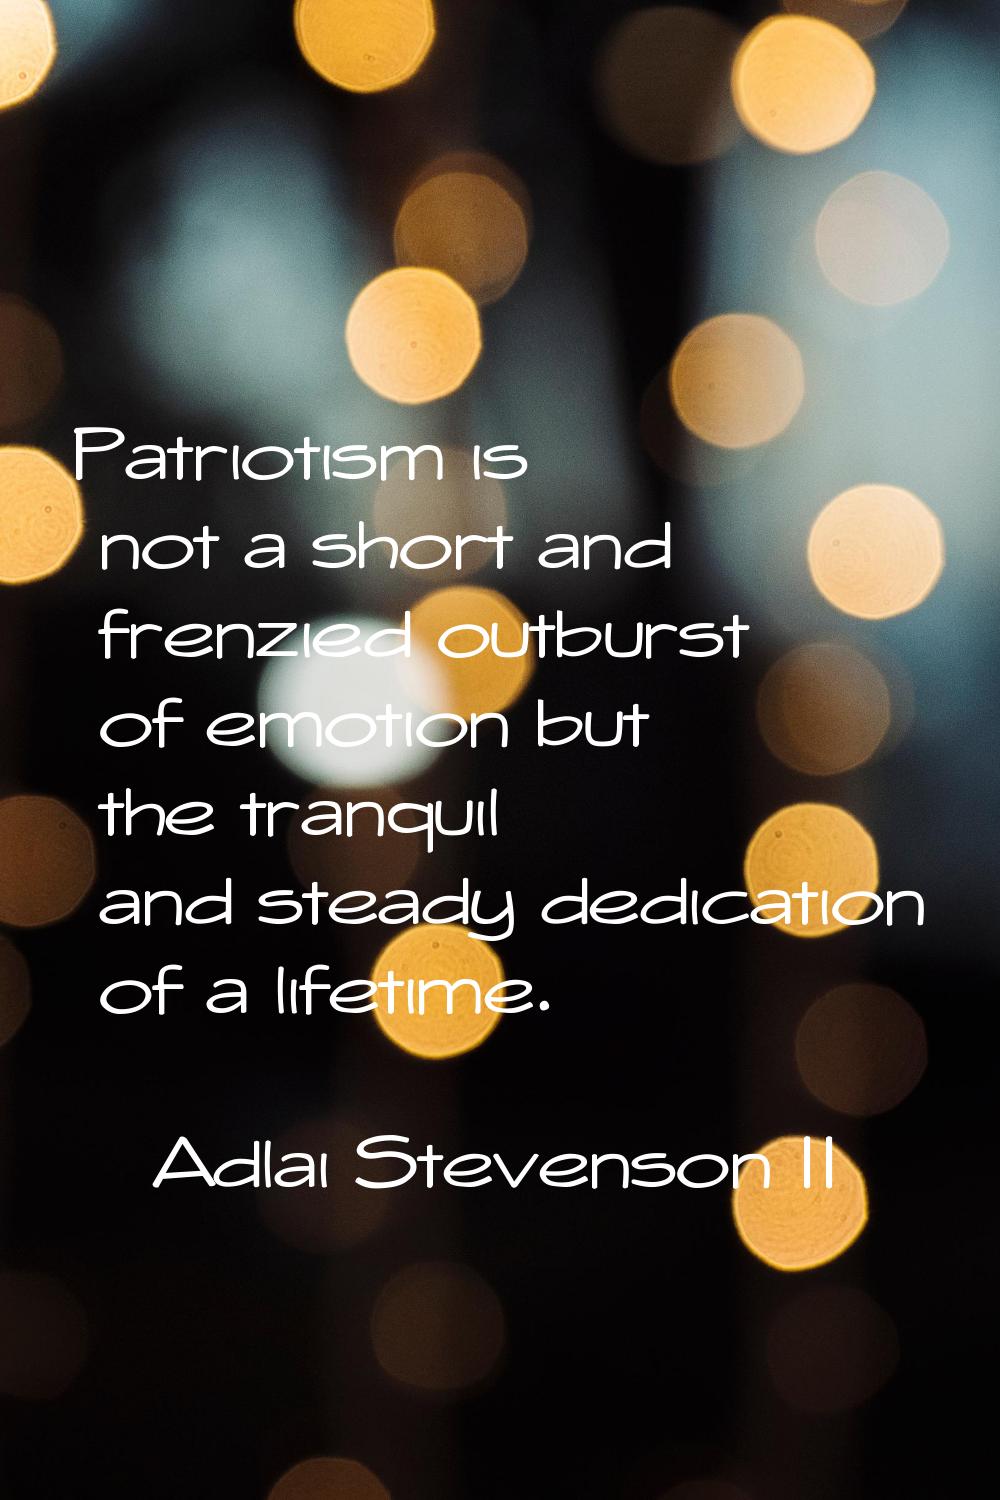 Patriotism is not a short and frenzied outburst of emotion but the tranquil and steady dedication o